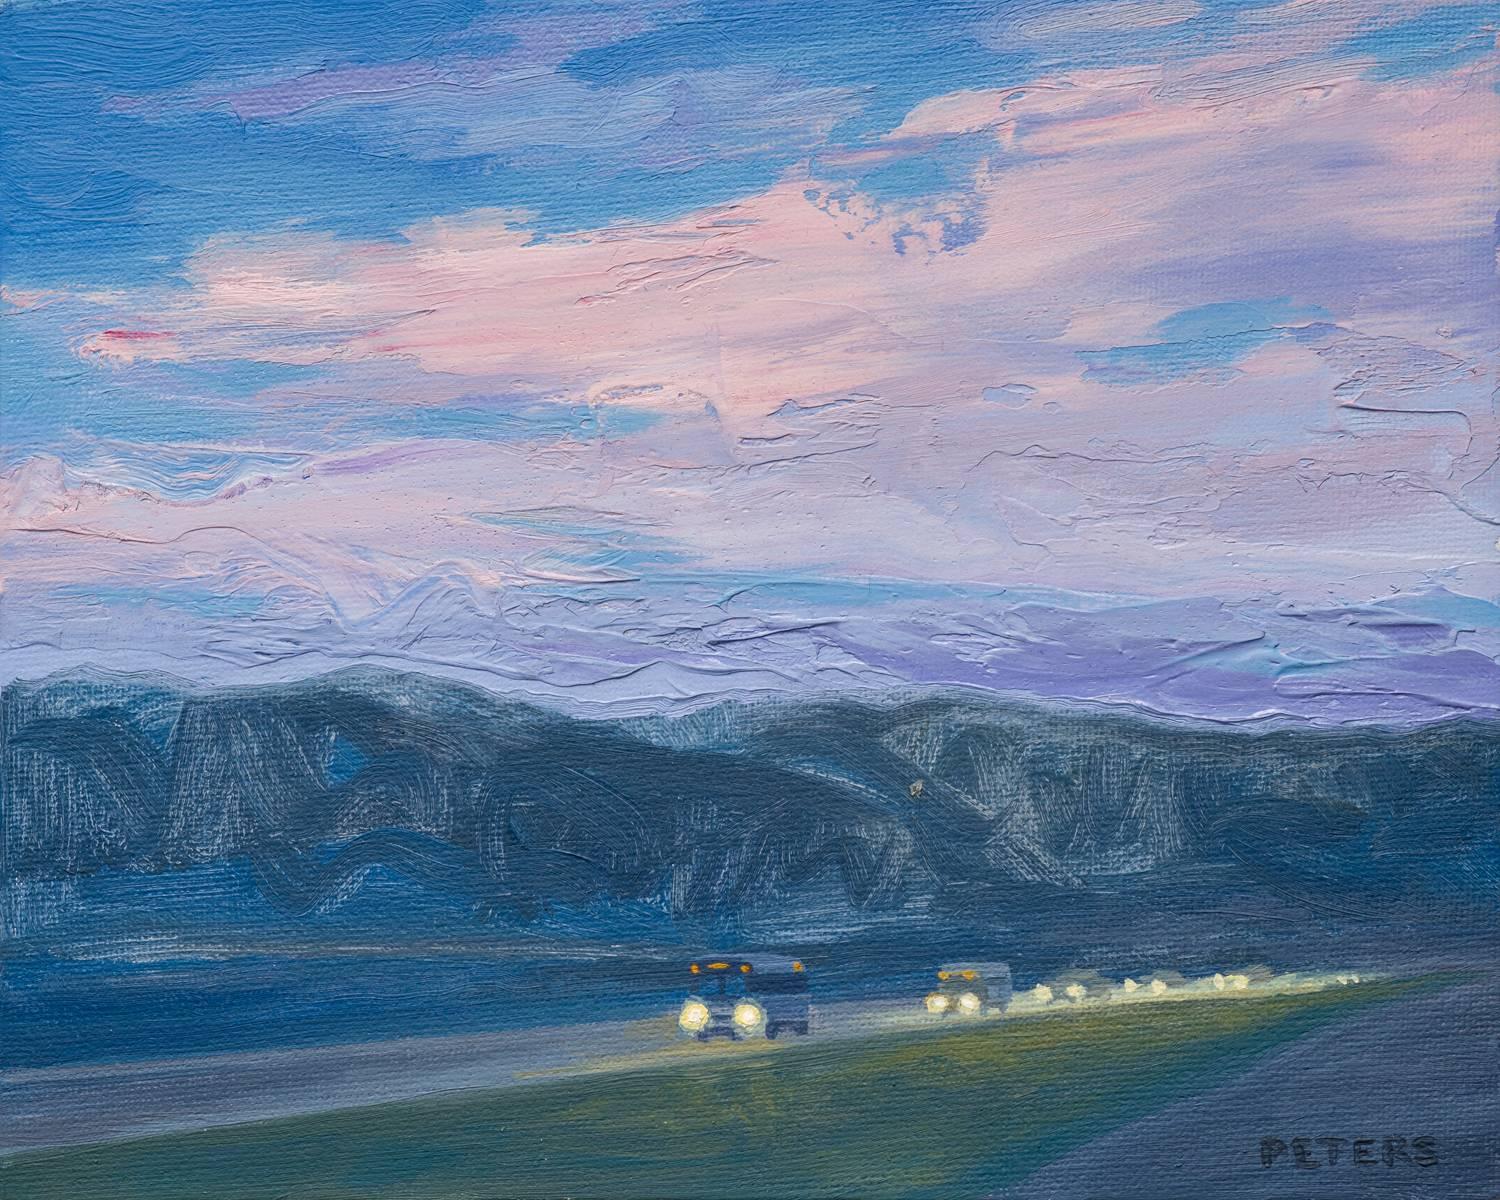 Evening Route - Painting by Tony Peters